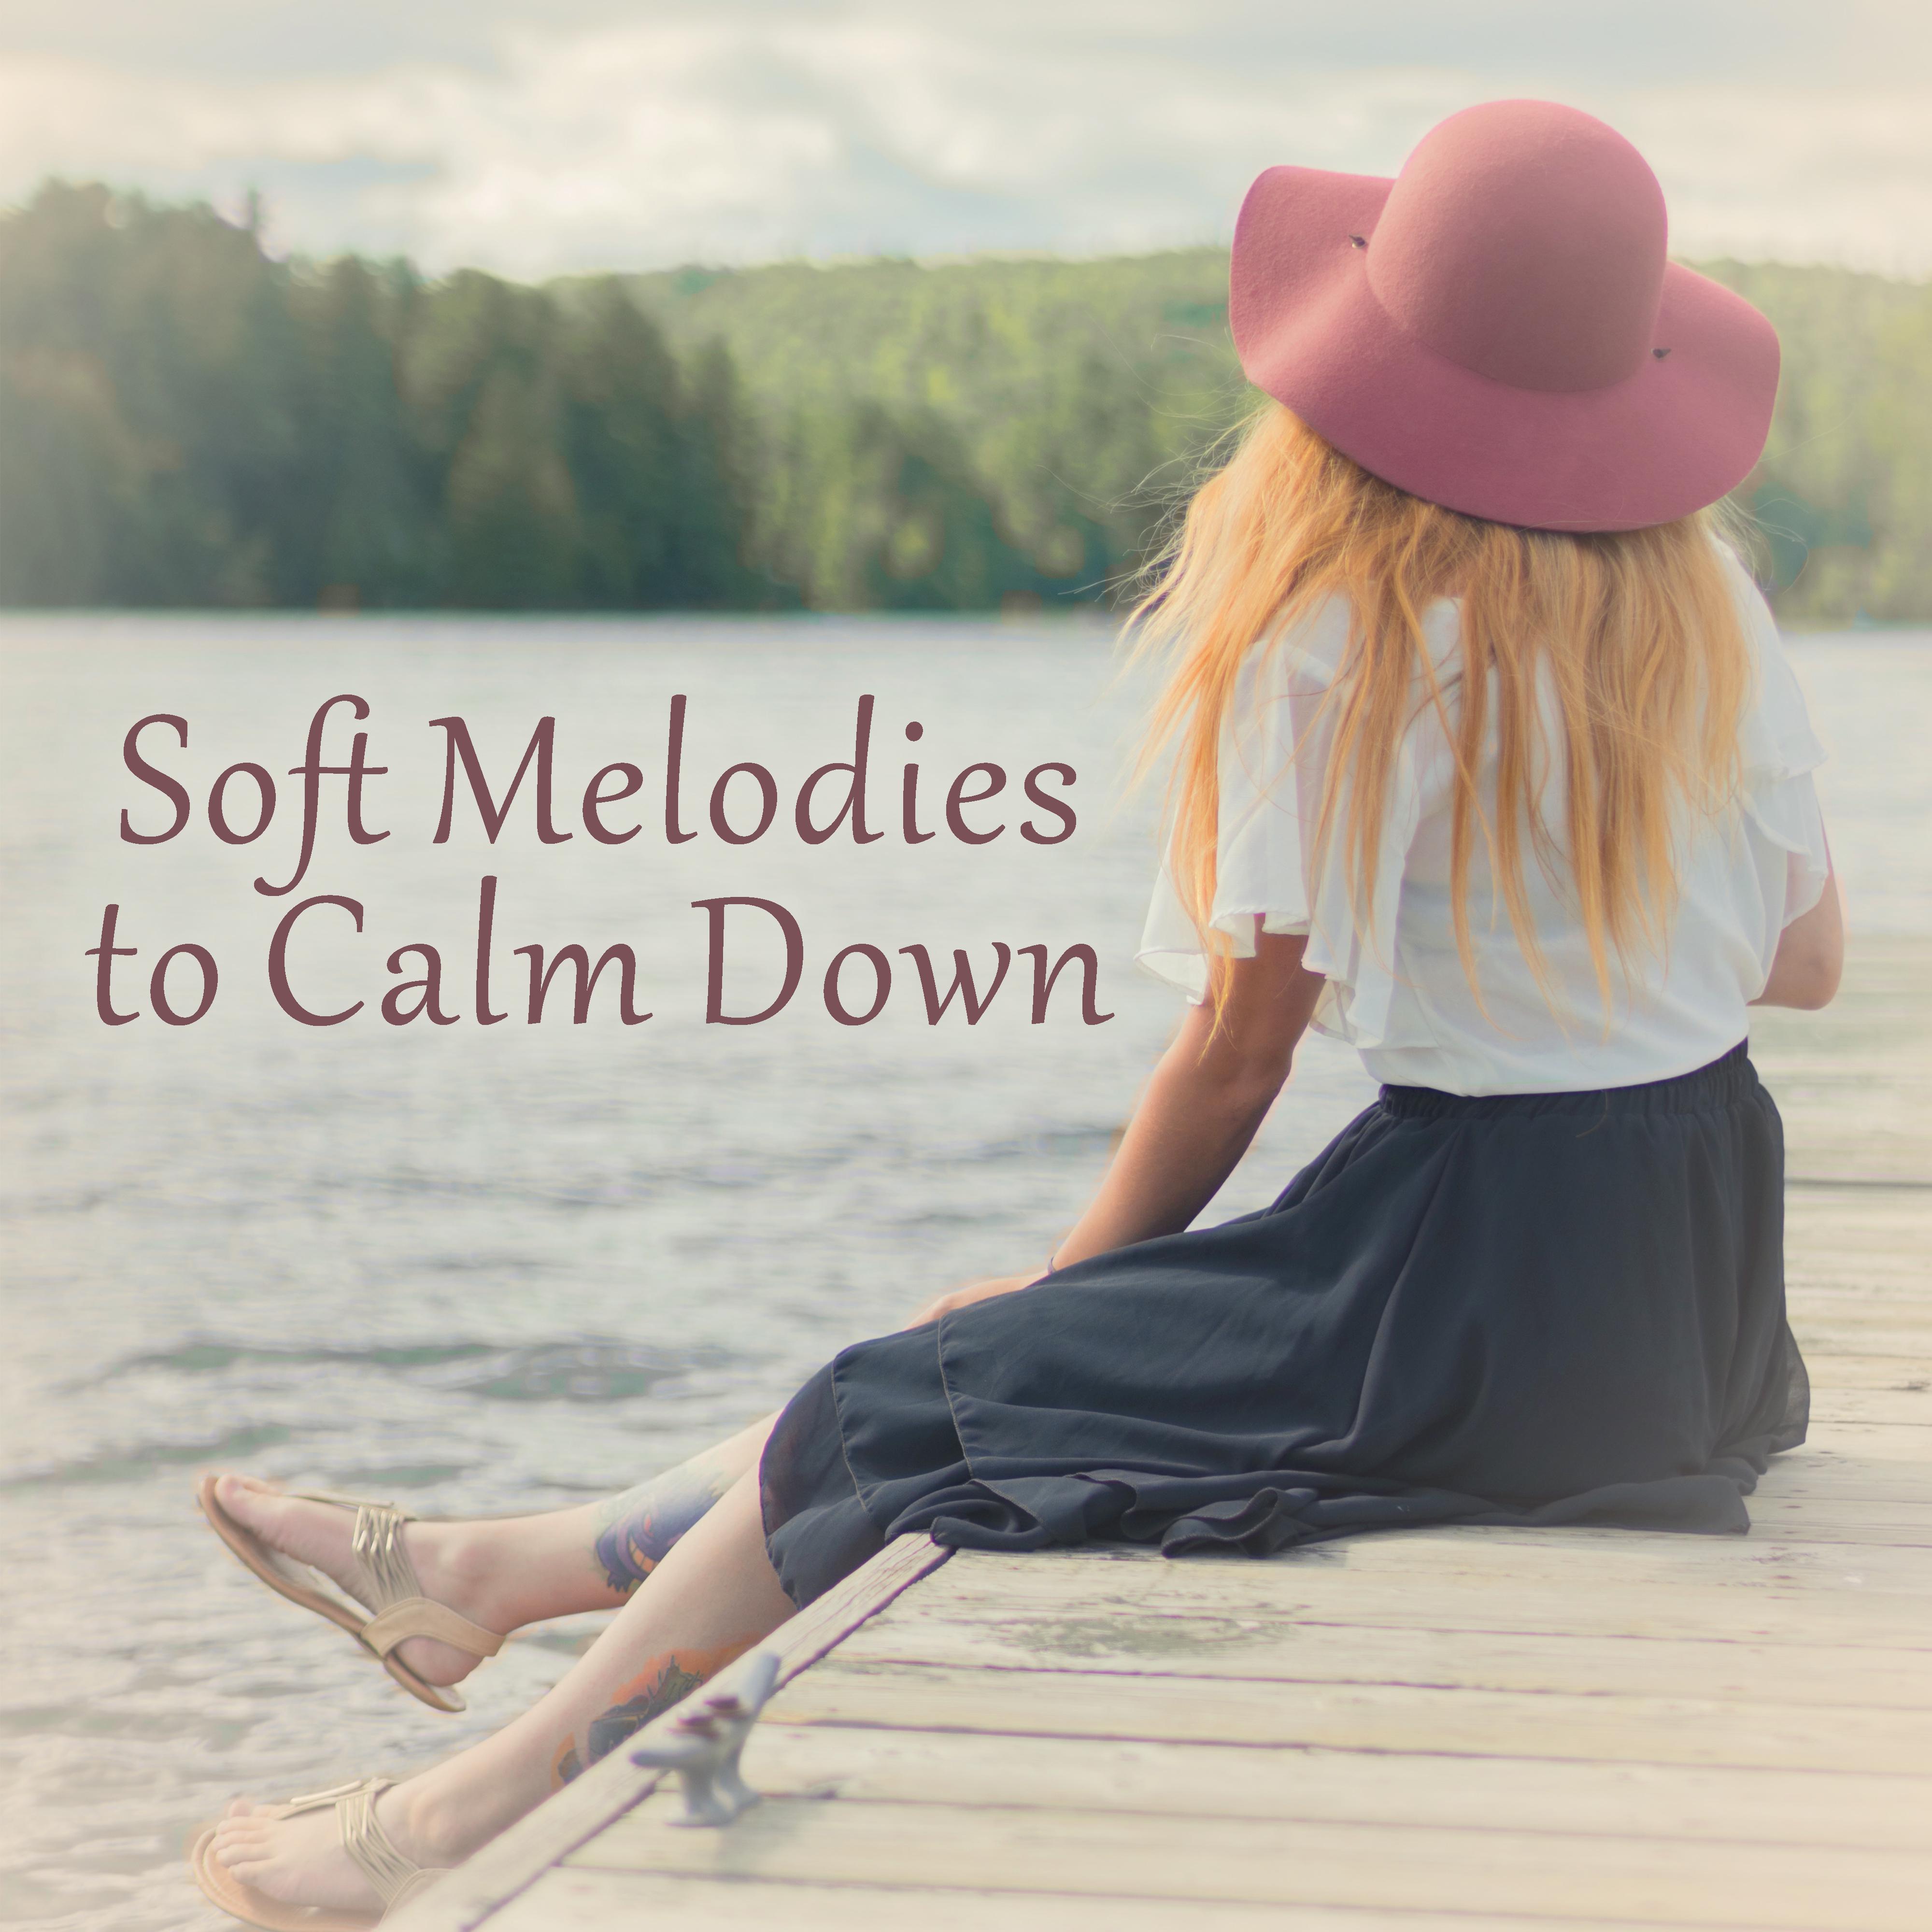 Soft Melodies to Calm Down  Calm Sounds to Rest, Easy Listening, Peaceful Beats, Soothing Music